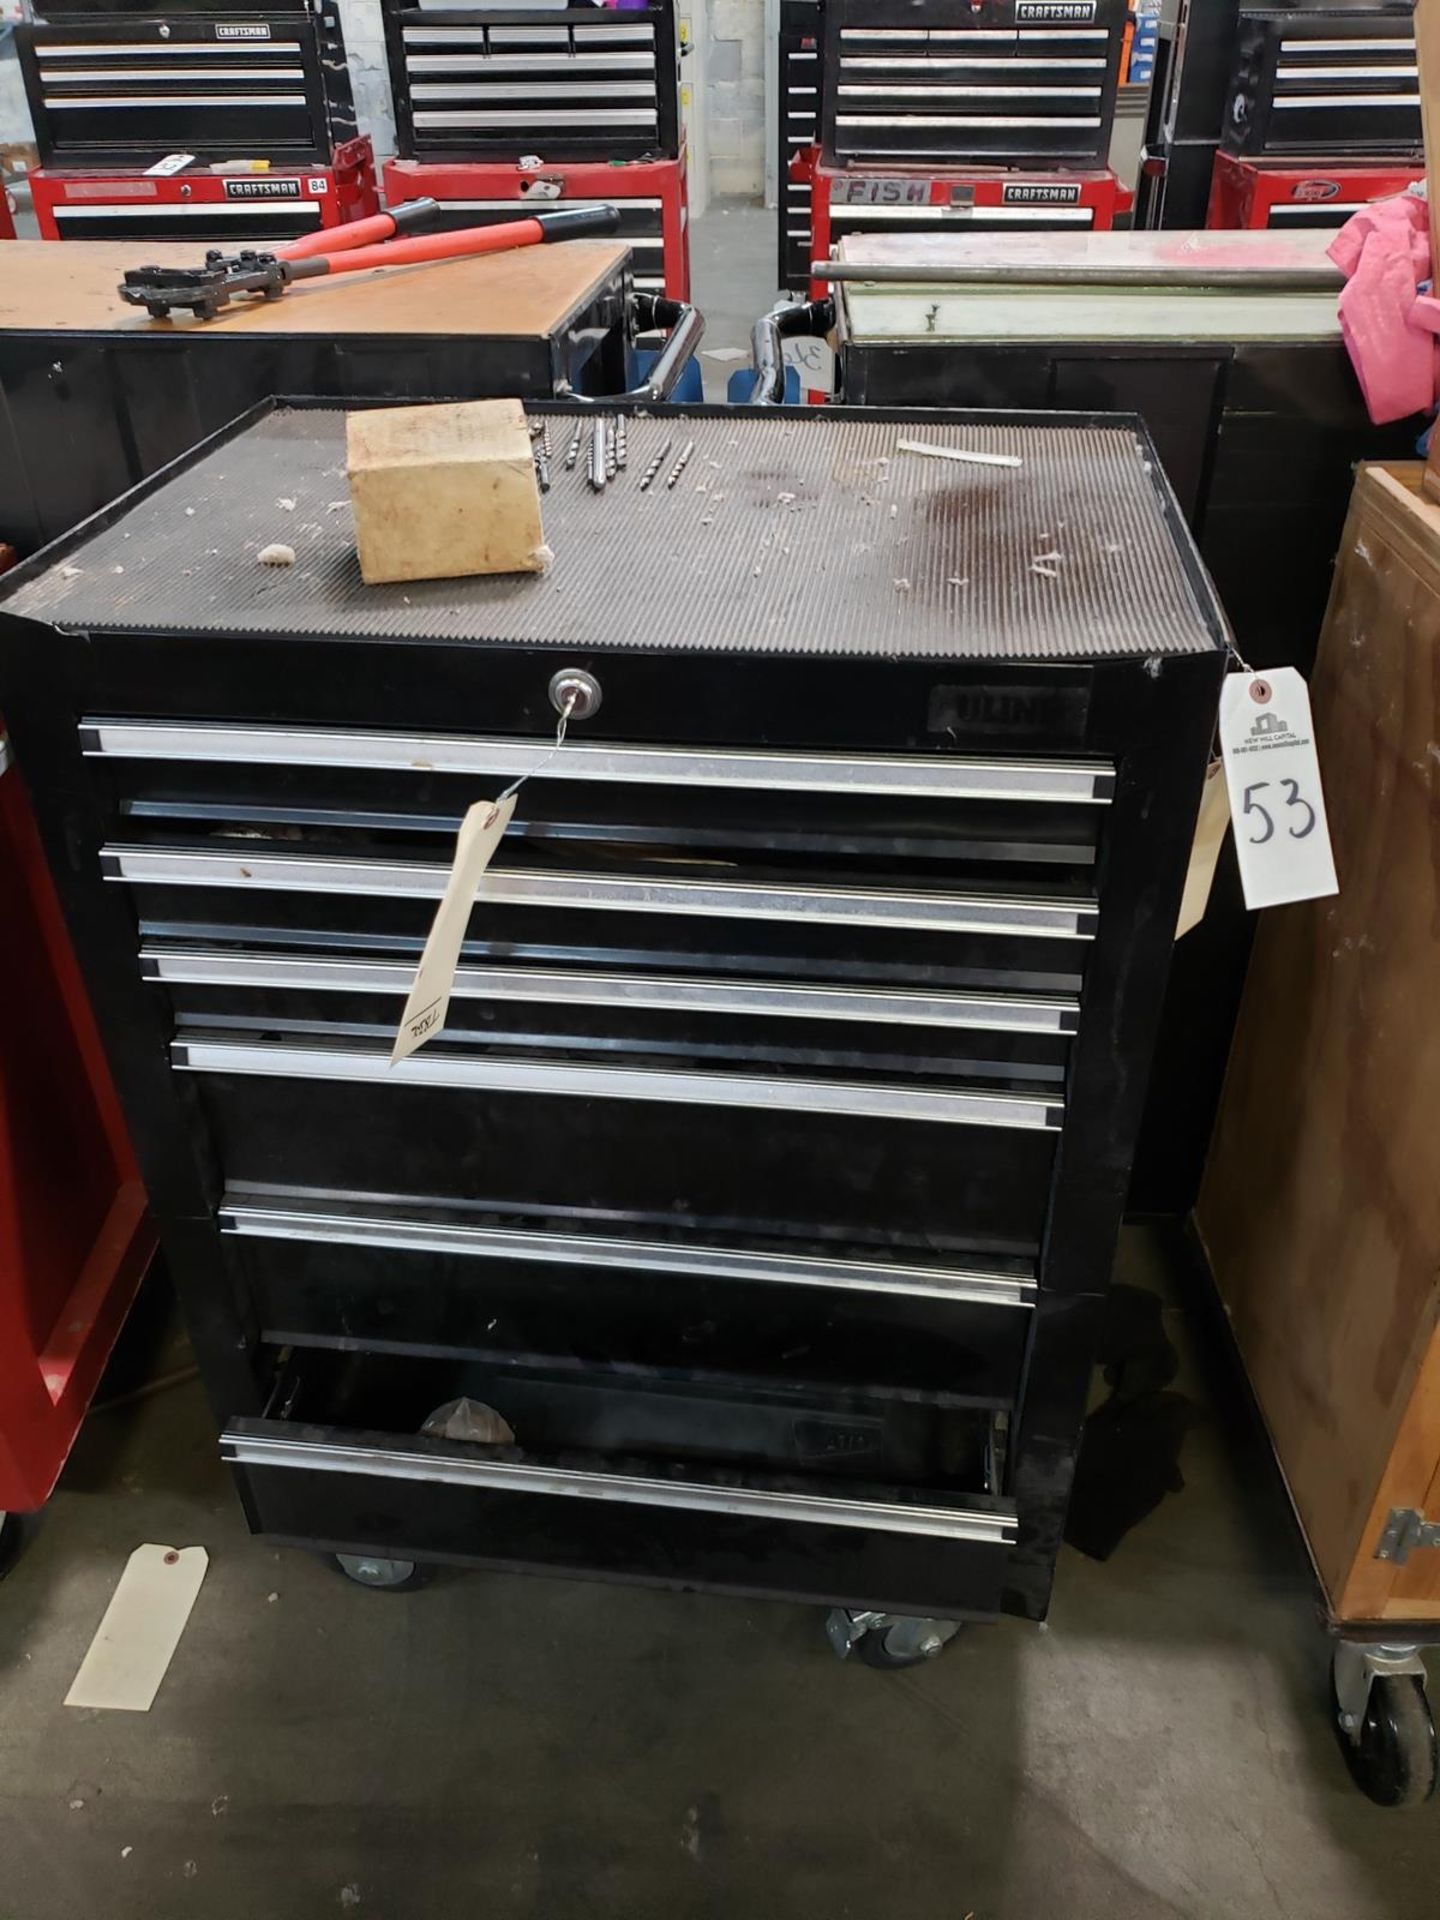 Uline Bottom Tool Chest, W/ Contents, (See Additional Pictures) Rig Fee: $25